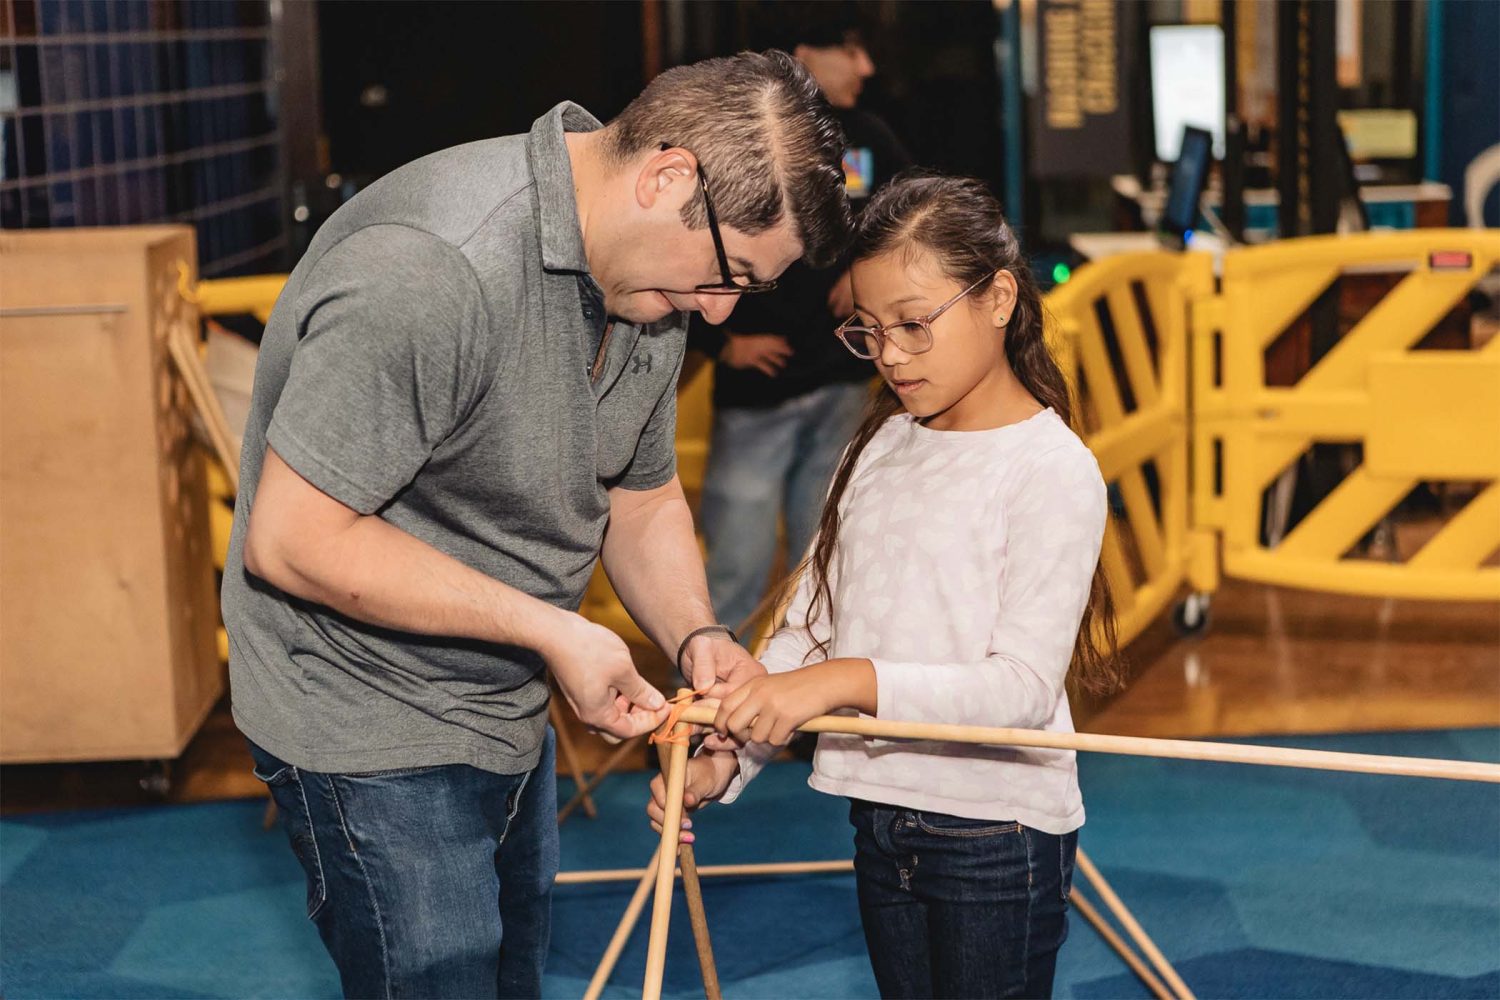 Elevating the Latino Community through STEM: A Community Day at The Tech